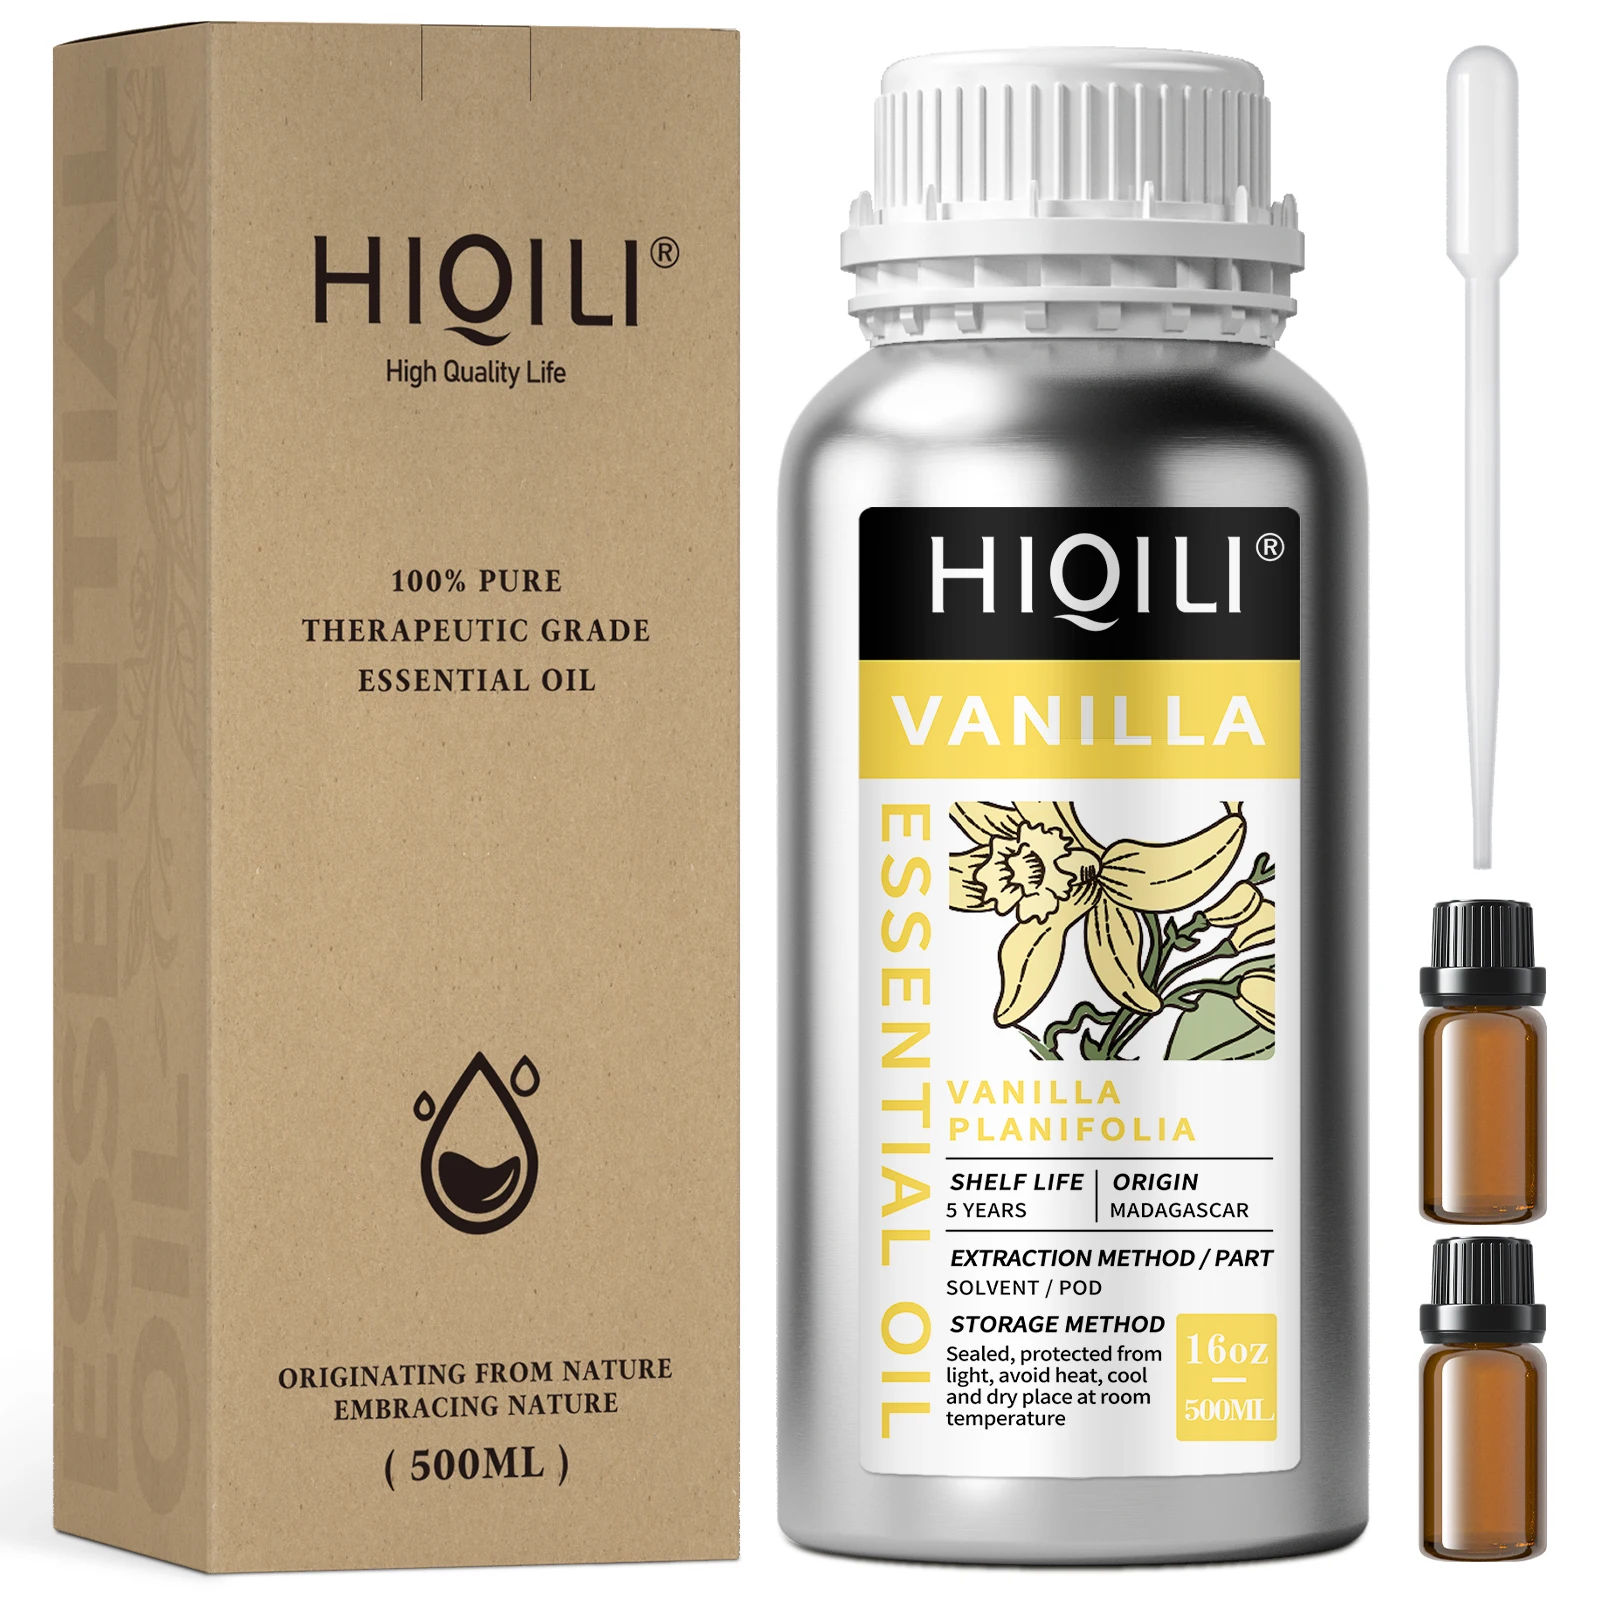 HIQILI 500ML Vanilla Essential Oils,100% Pure Nature for Aromatherapy | Used for Diffuser, Humidifier, Massage | Perfume DIY mayjam free shipping 500ml essential oil for woman and man aroma oil for making perfumes humidifier aromatic diffuser